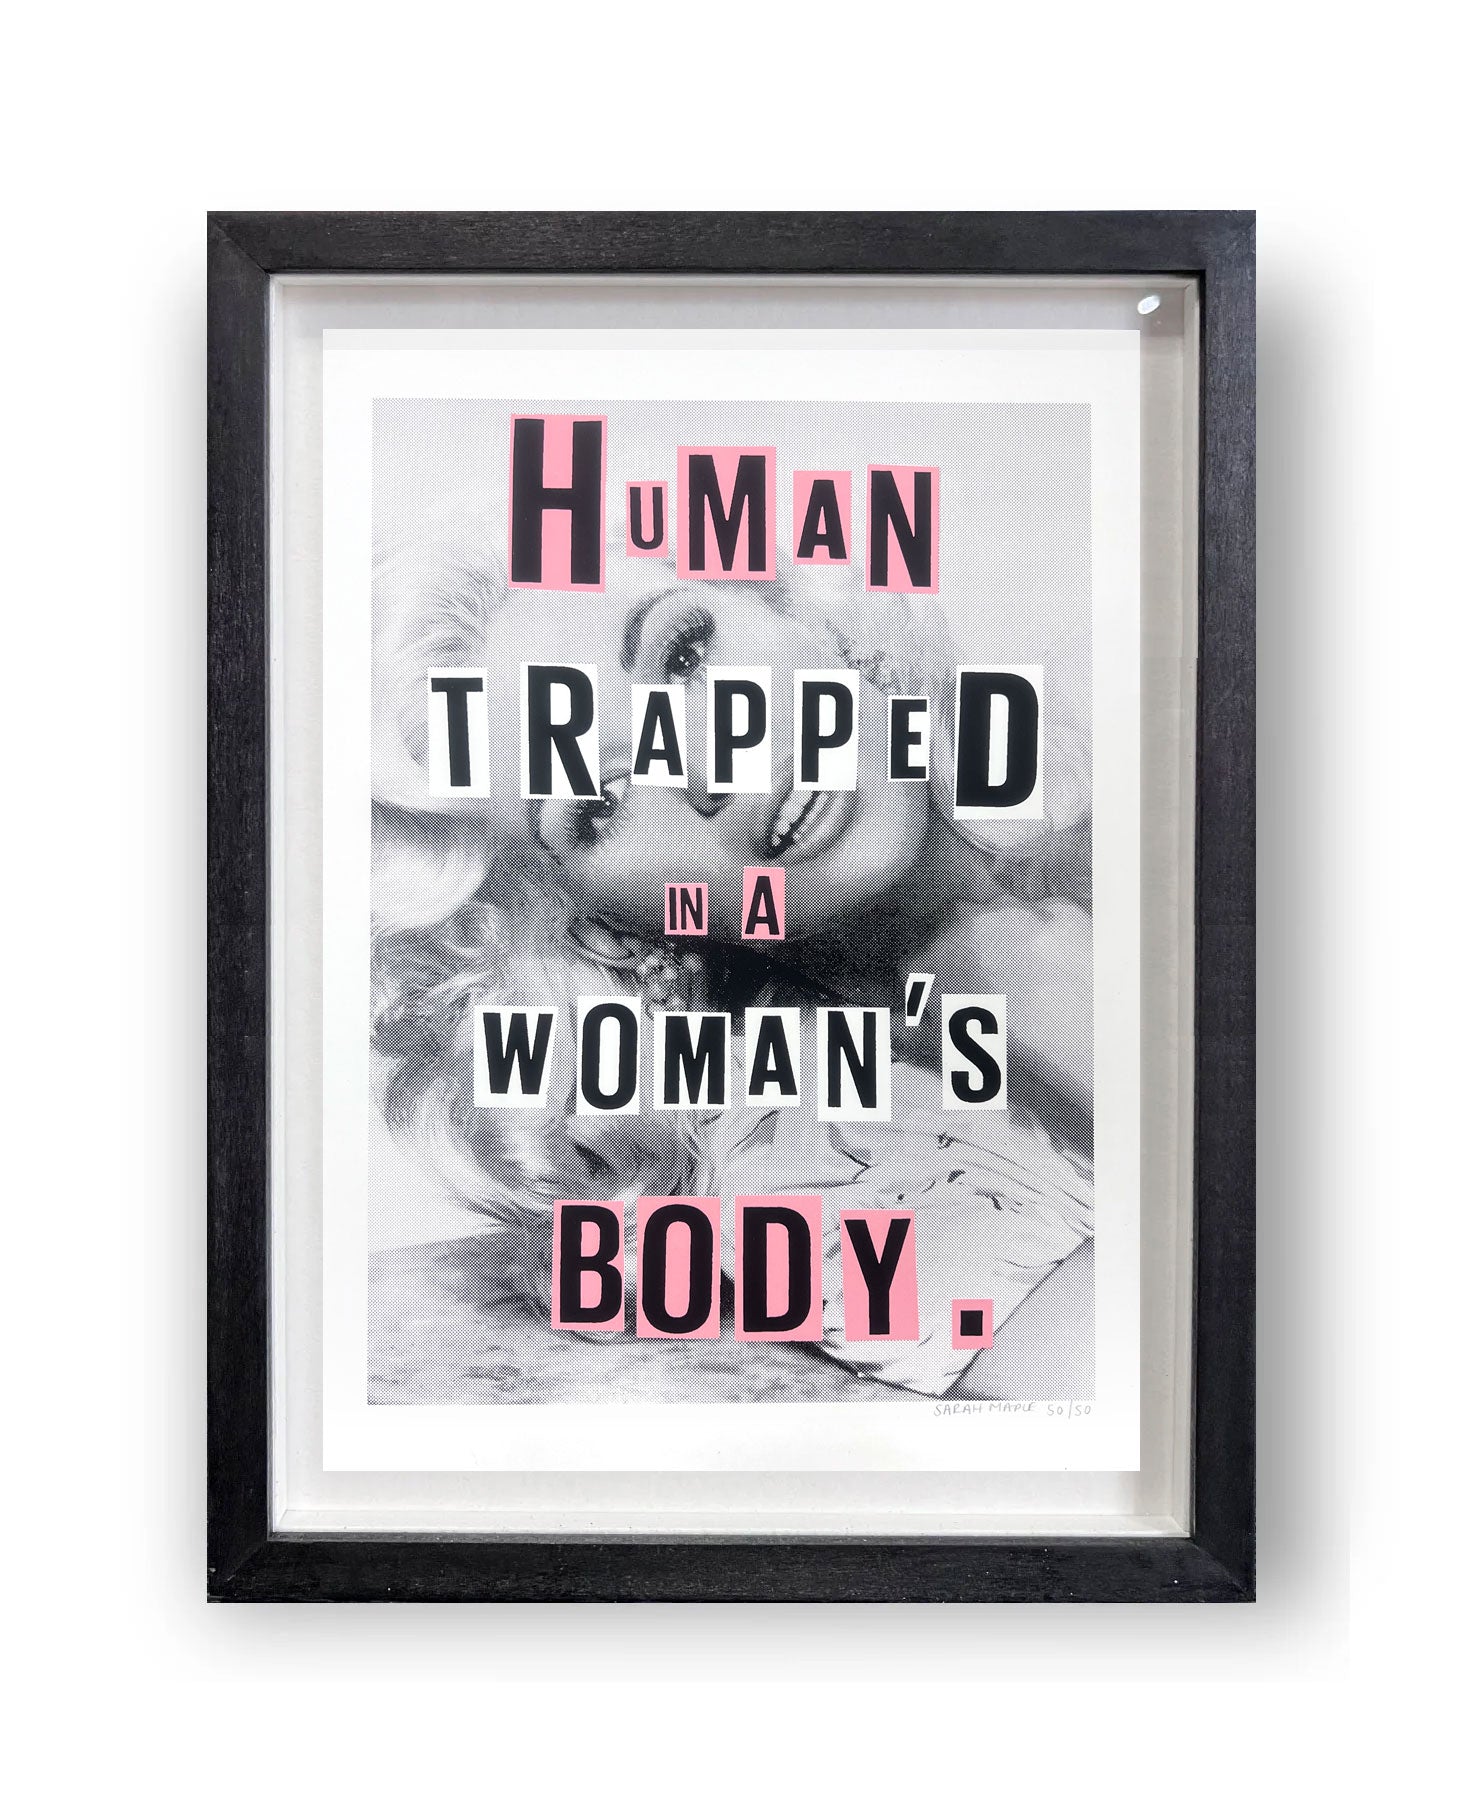 Human Trapped in a Woman's Body by Sarah Maple